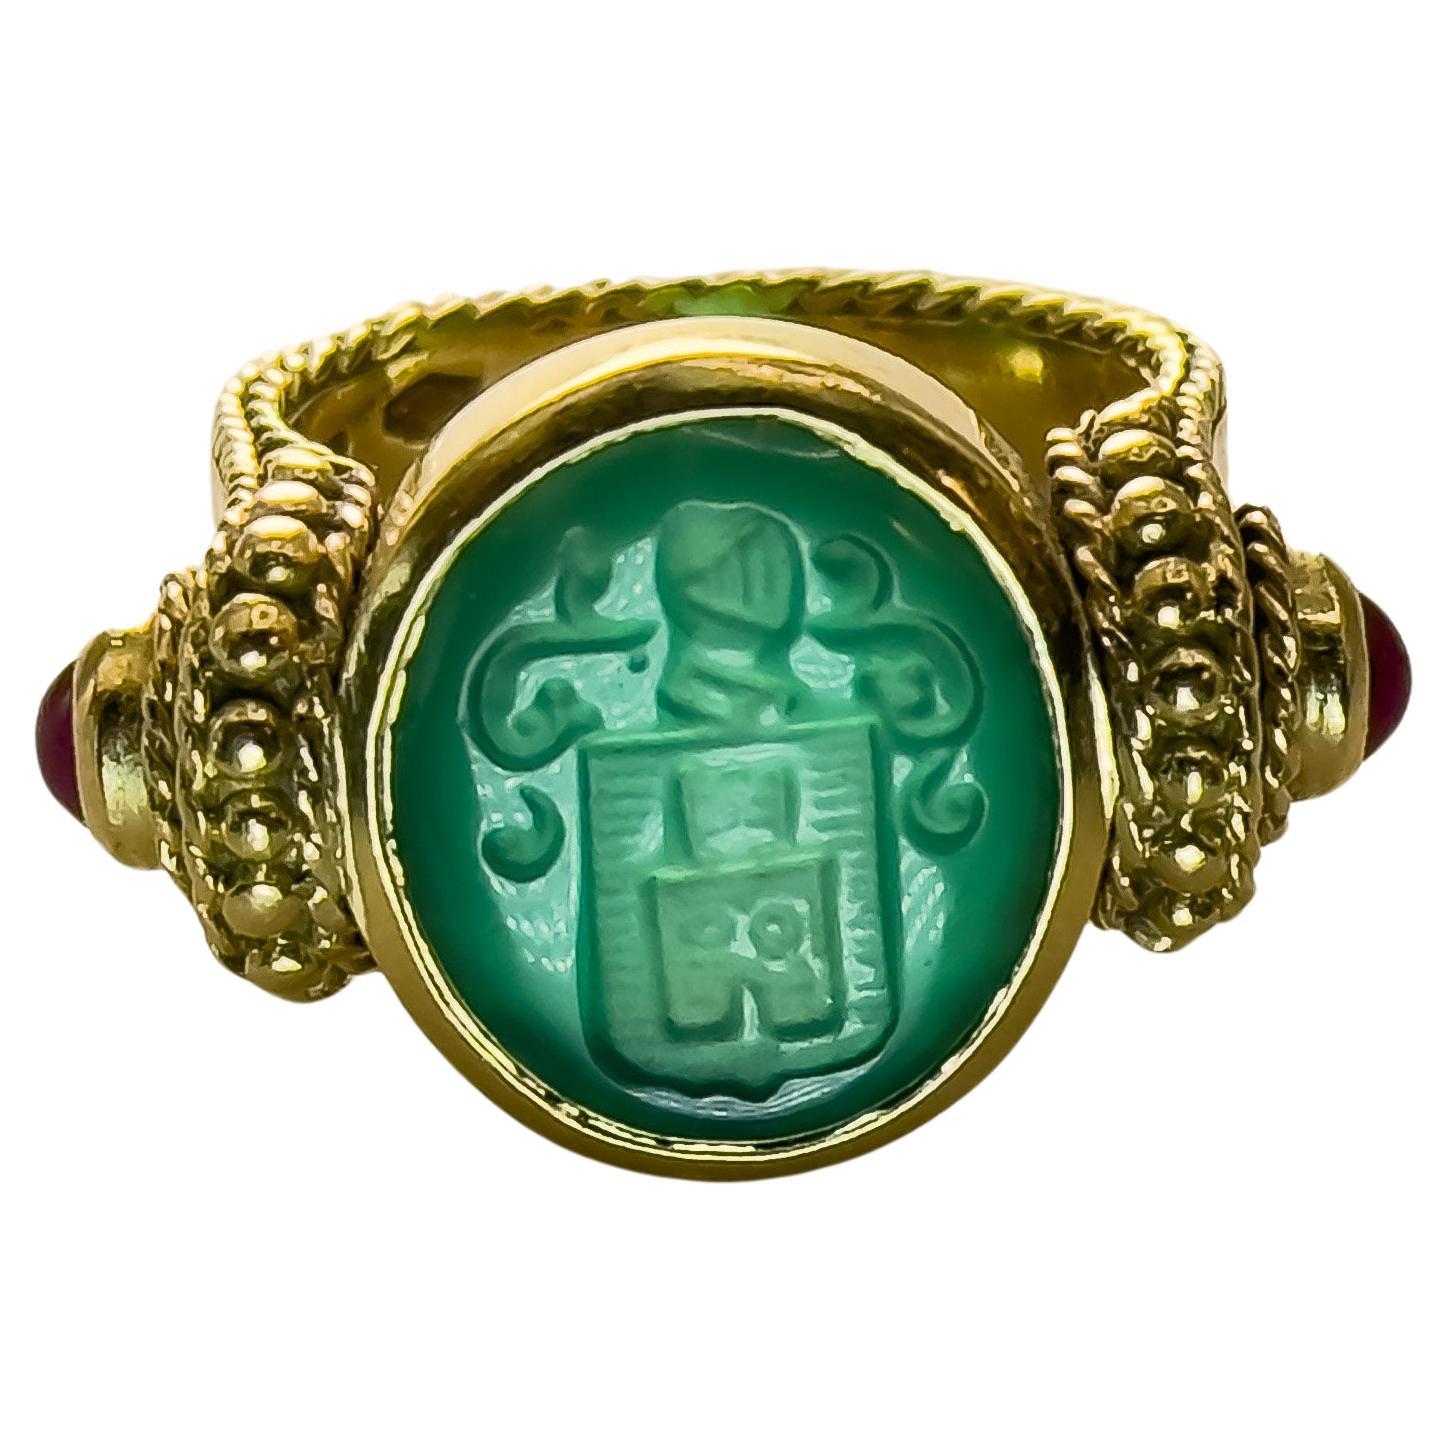 Indulge in the luxury of bygone eras with this stately vintage signet ring. Expertly crafted in 18K gold, it features an intricately carved natural jade centerpiece, flanked by two rich cabochon rubies. A substantial piece with a total weight of